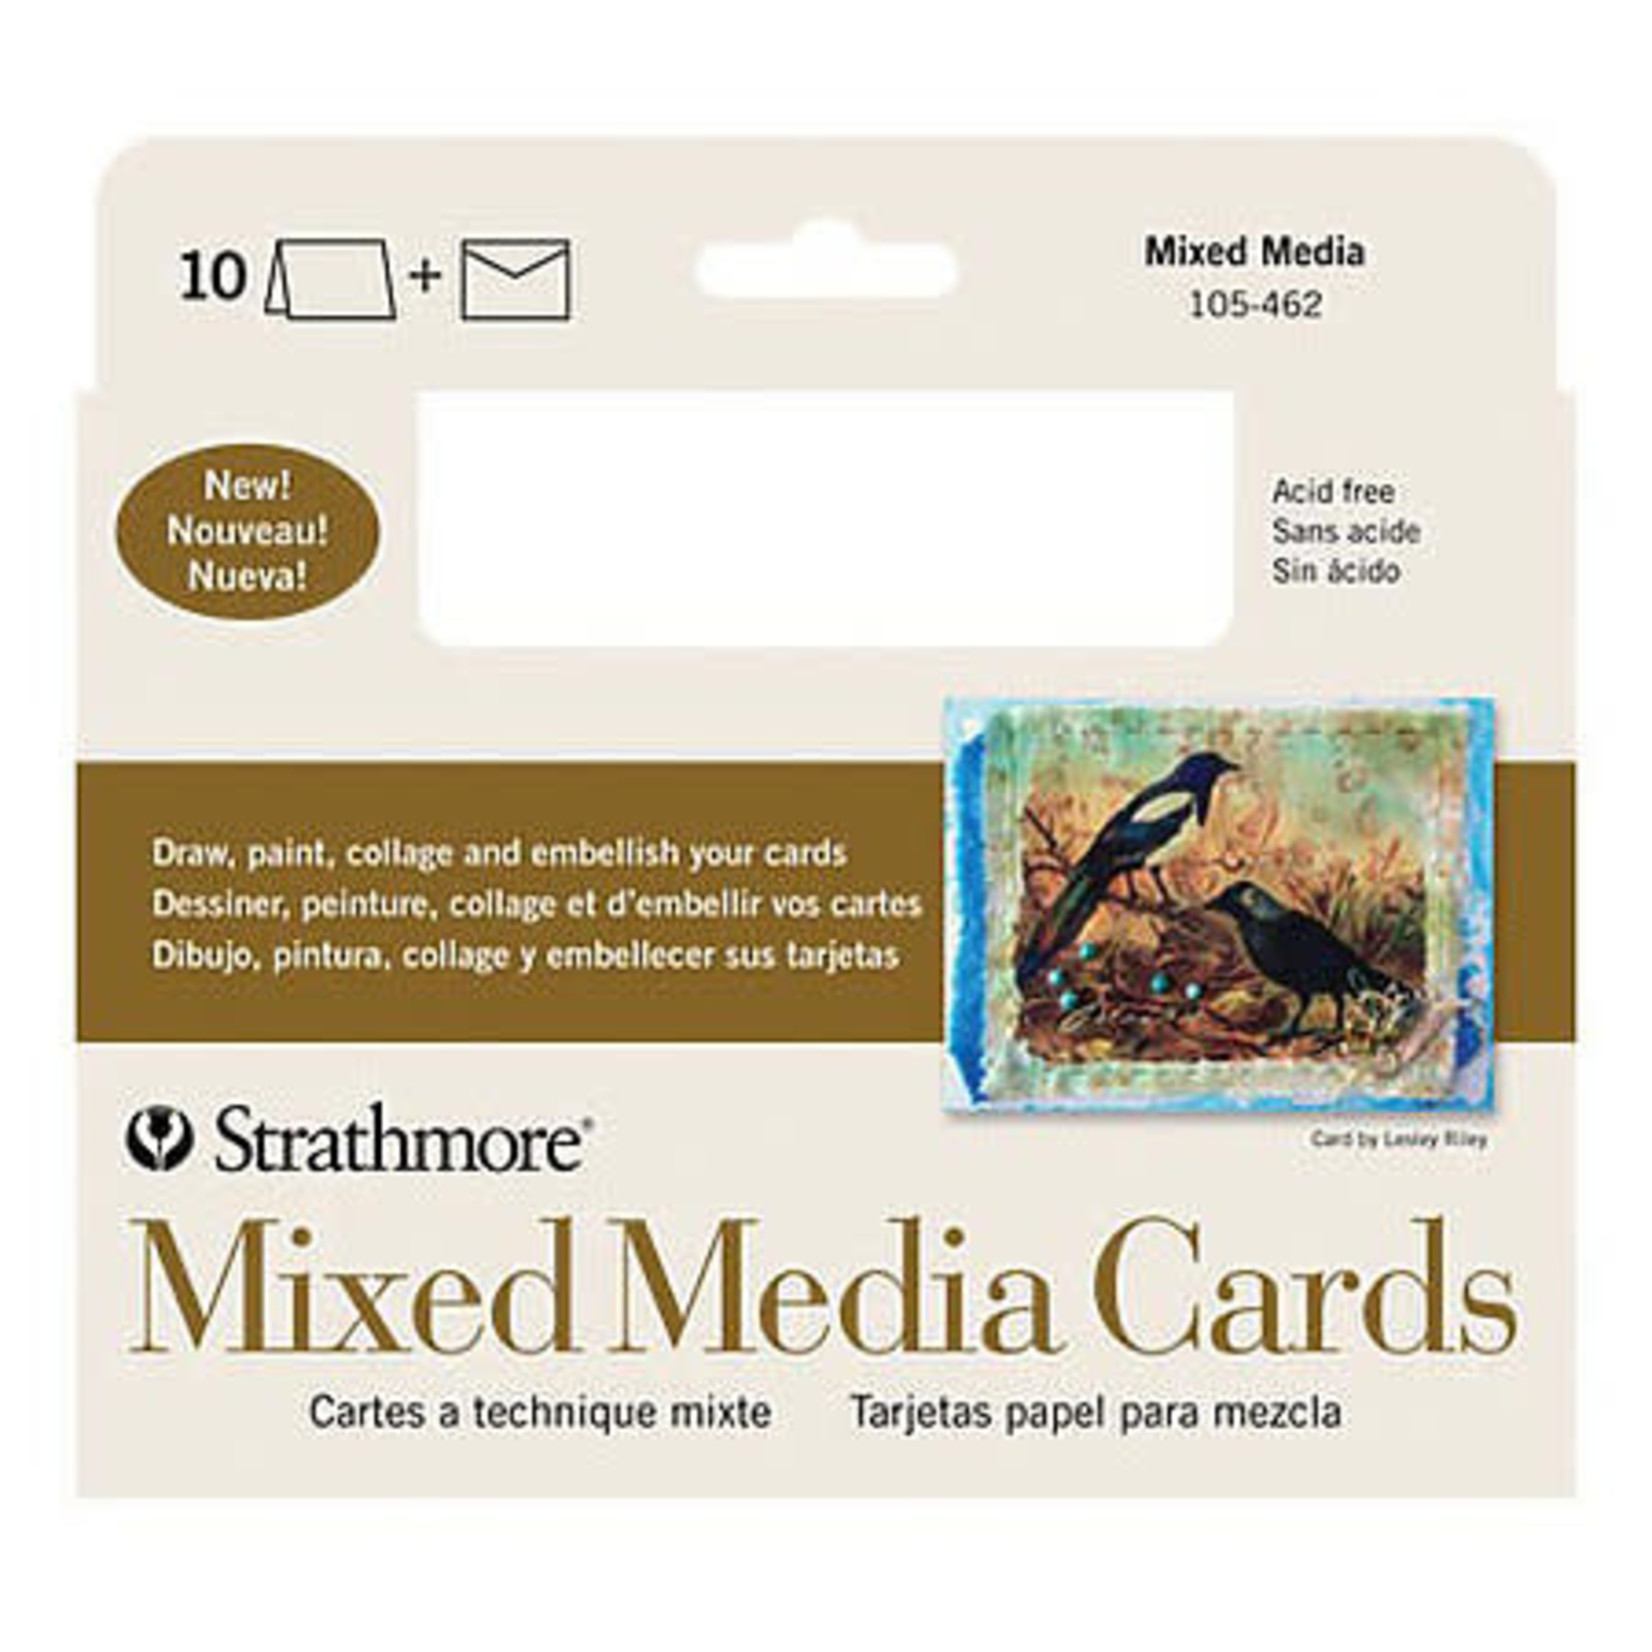 Strathmore Artist Papers 5" x 6.875" Mixed Media Cards & Envelopes 10 Pk 105-462